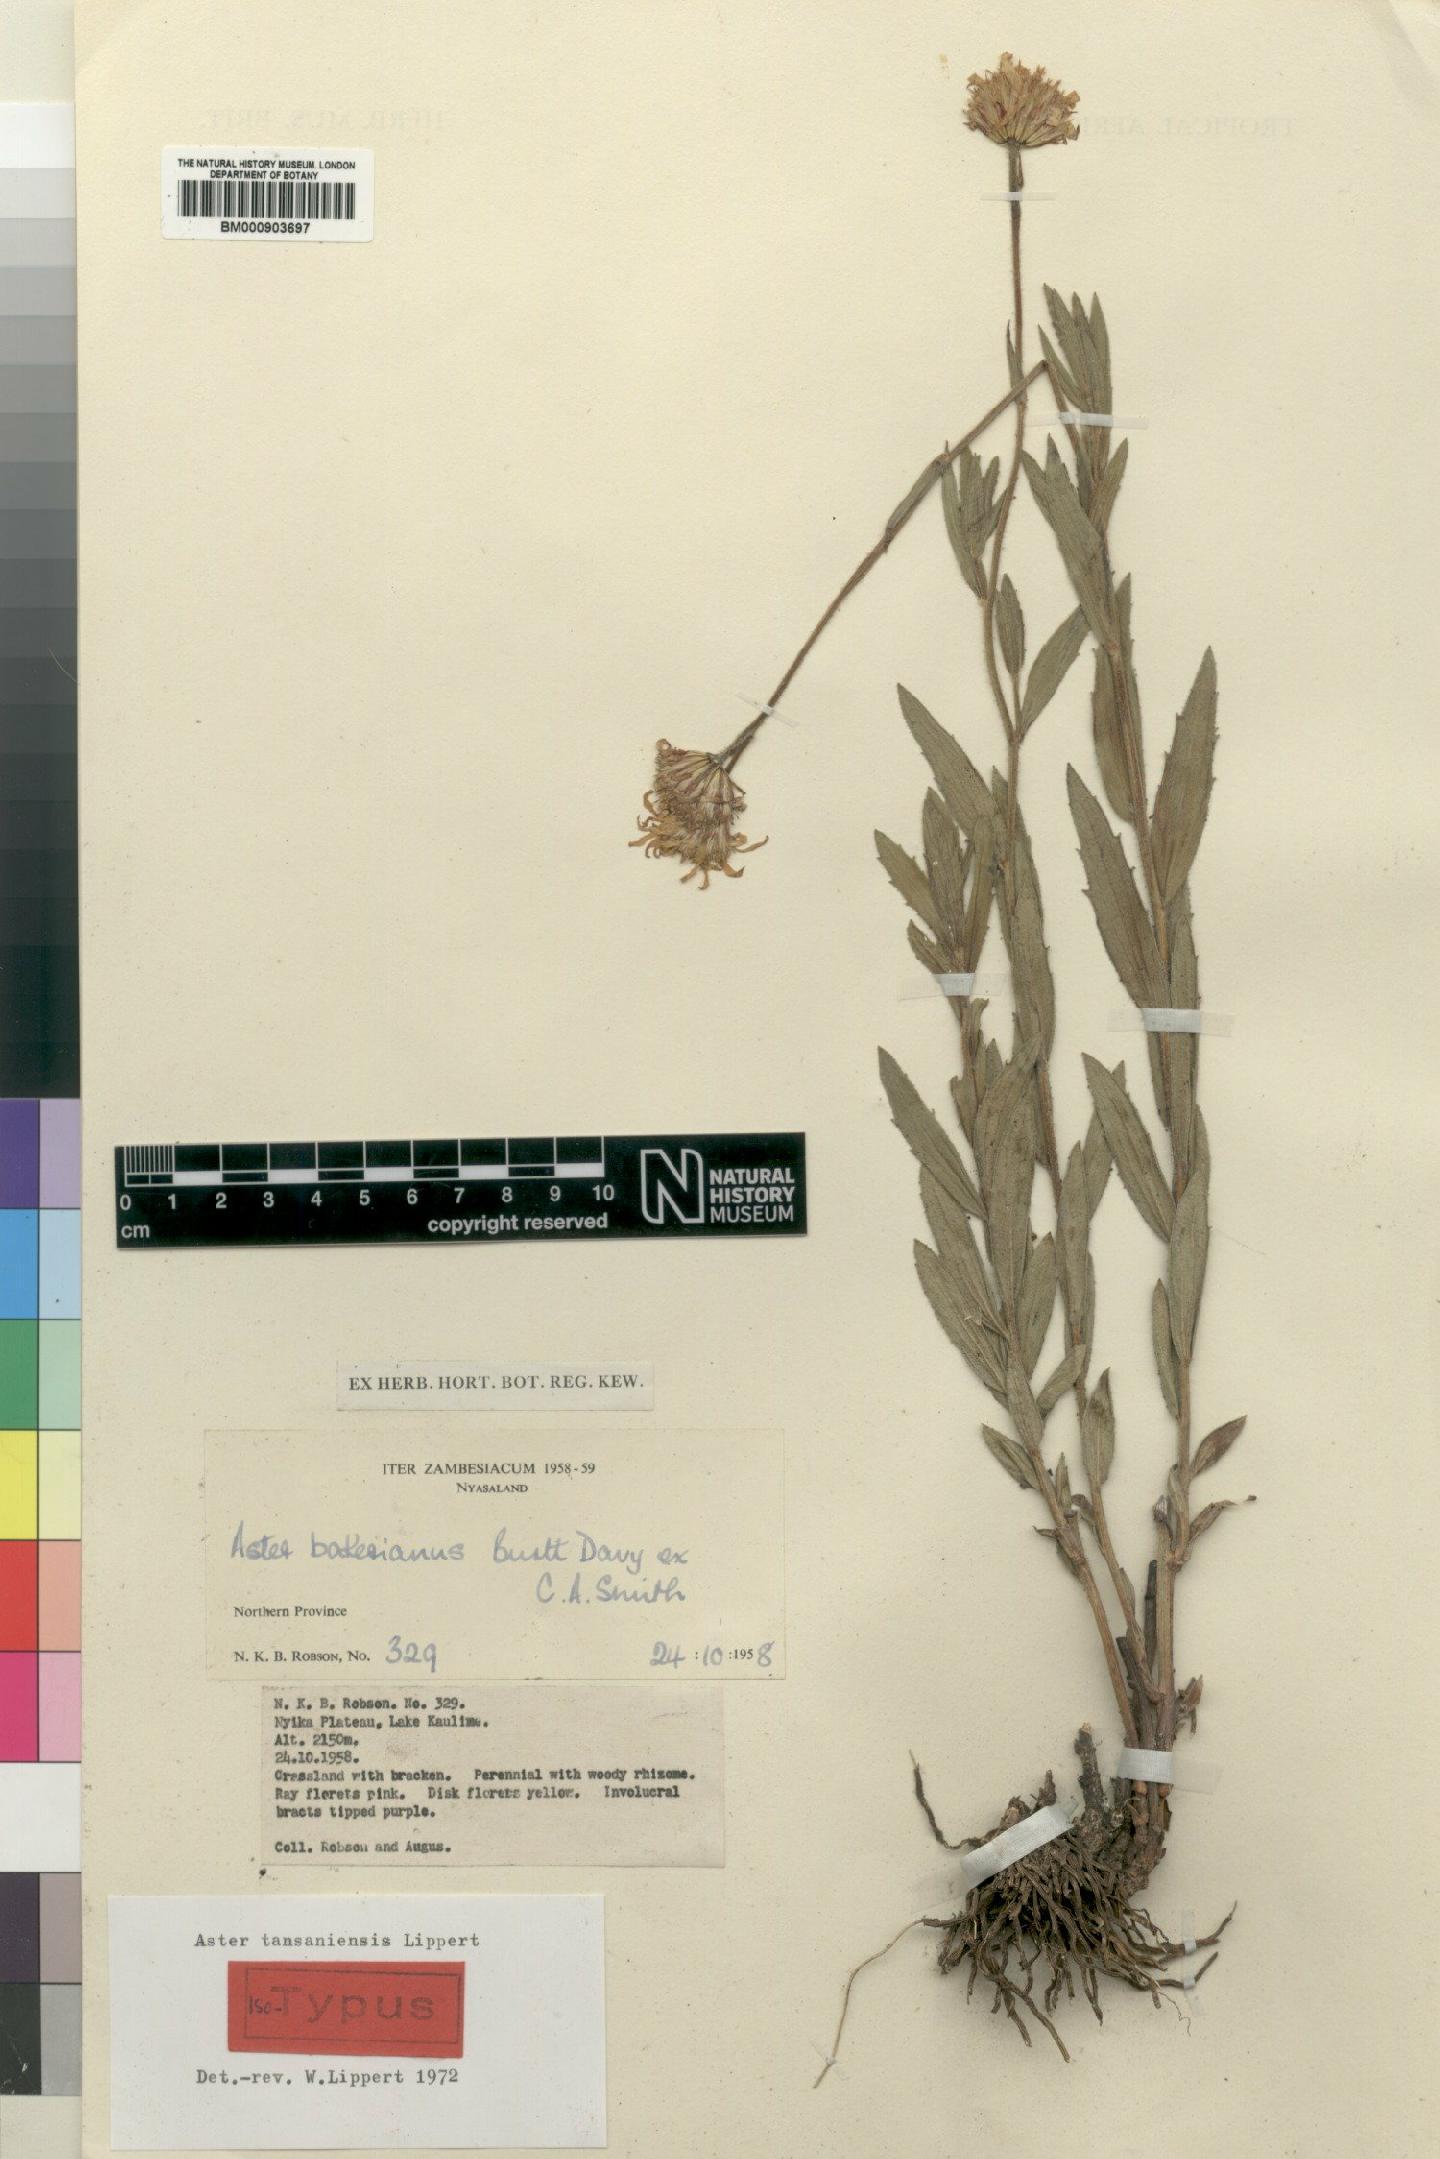 To NHMUK collection (Aster tansaniensis Lippert; Isotype; NHMUK:ecatalogue:4528704)